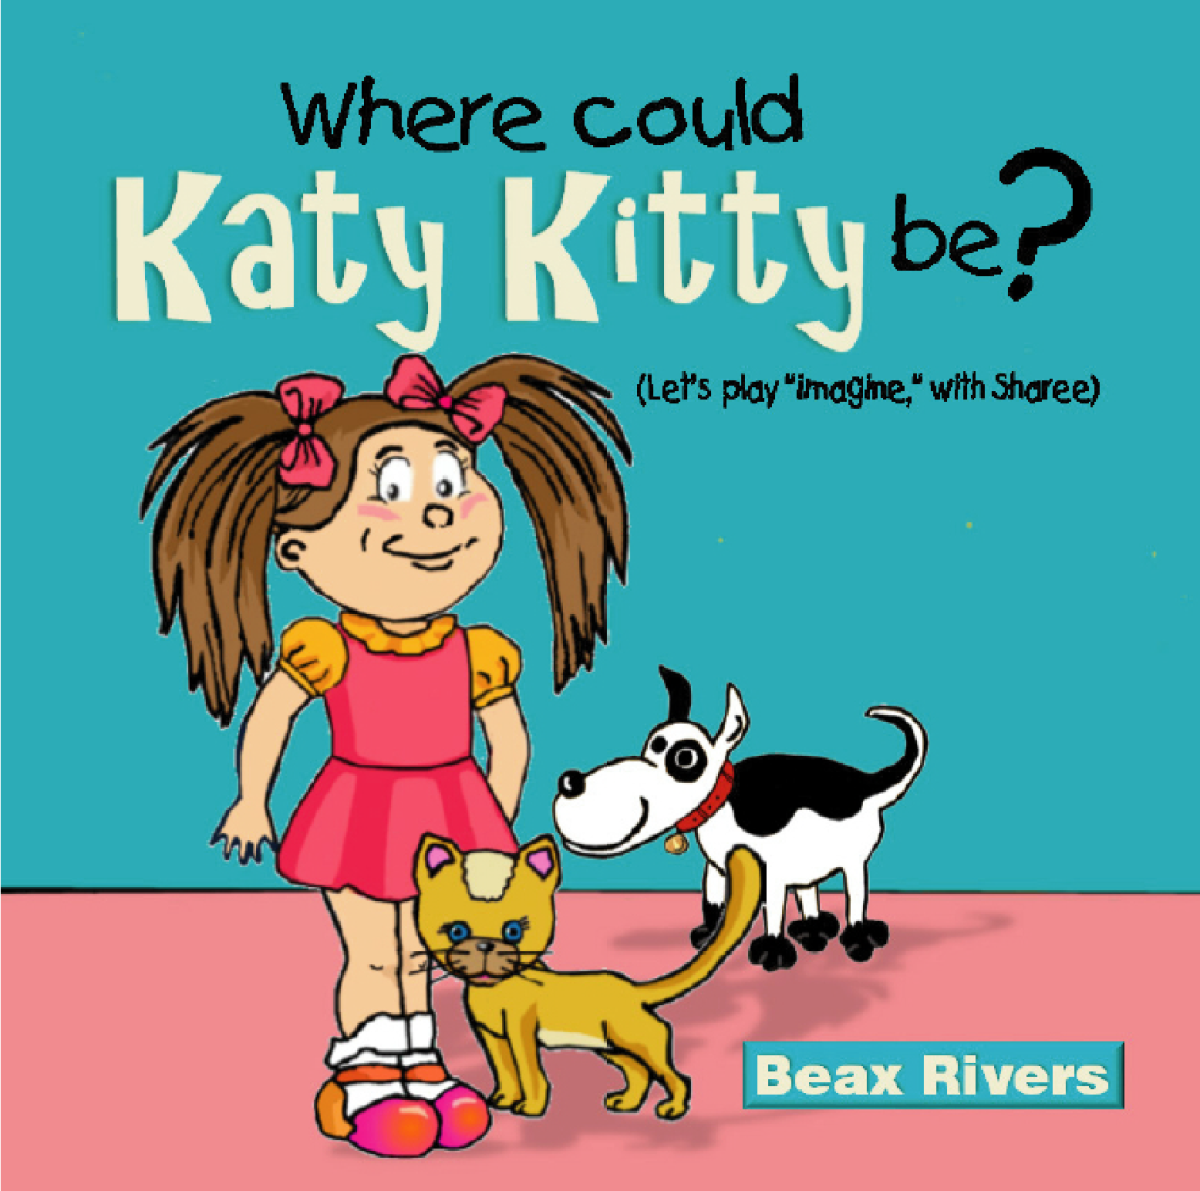 I also enjoy writing and publishing children's books under my pen name, Beax Rivers. See/search for it on Amazon.com.